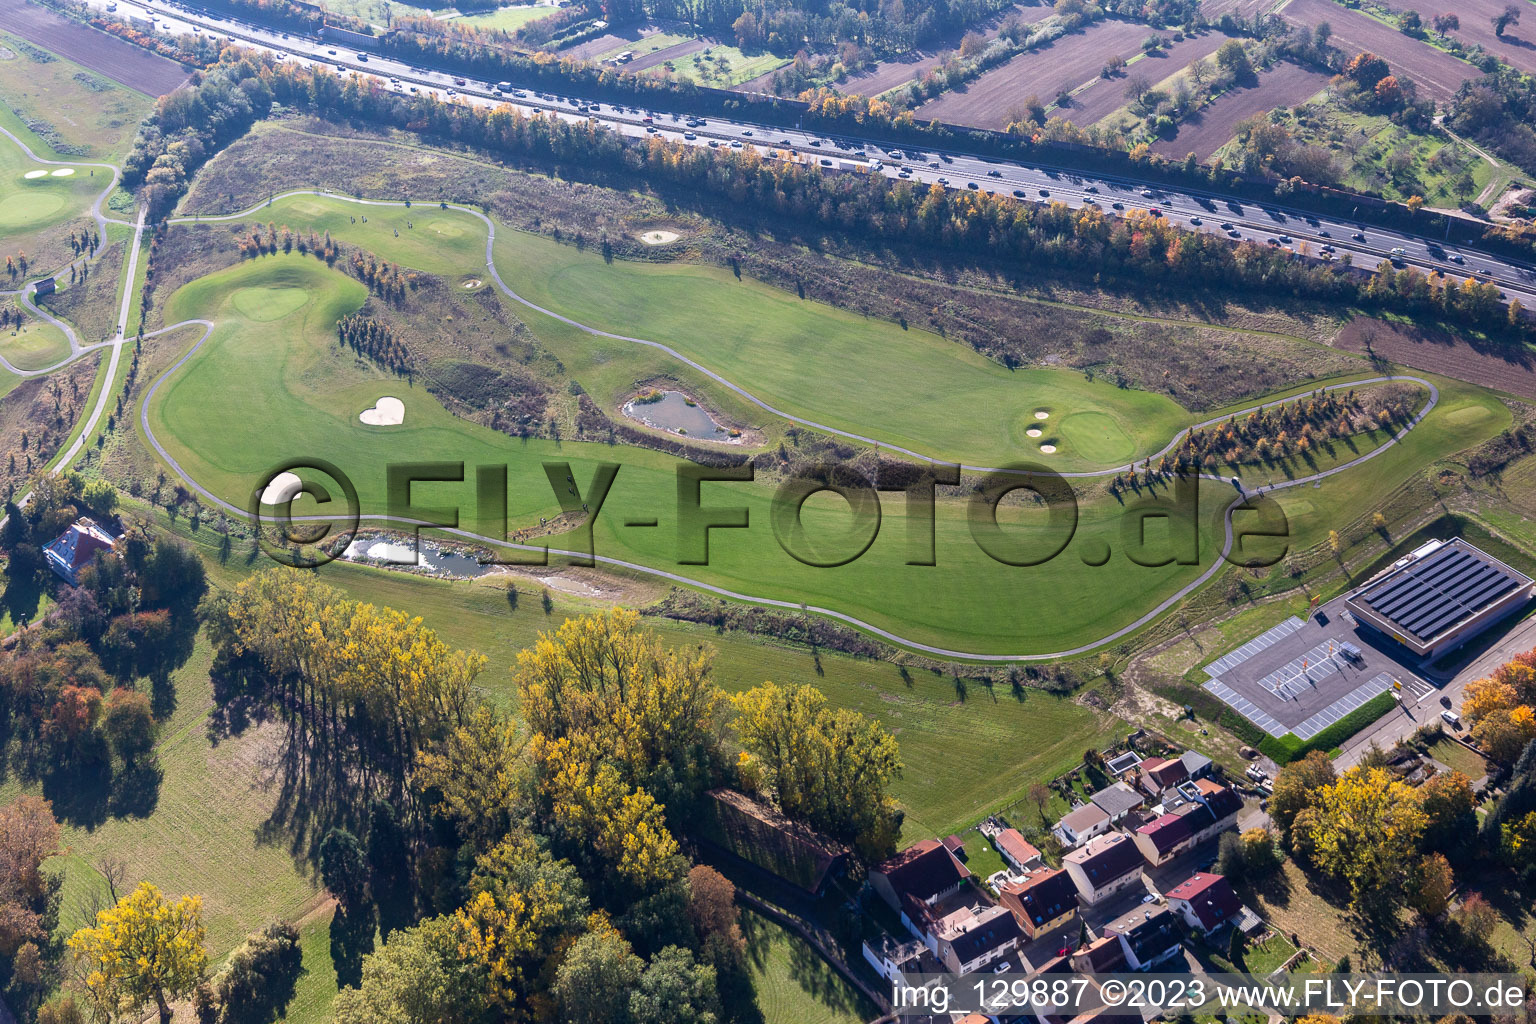 Grounds of the Golf course at Golfpark Karlsruhe GOLF absolute in Karlsruhe in the state Baden-Wuerttemberg, Germany